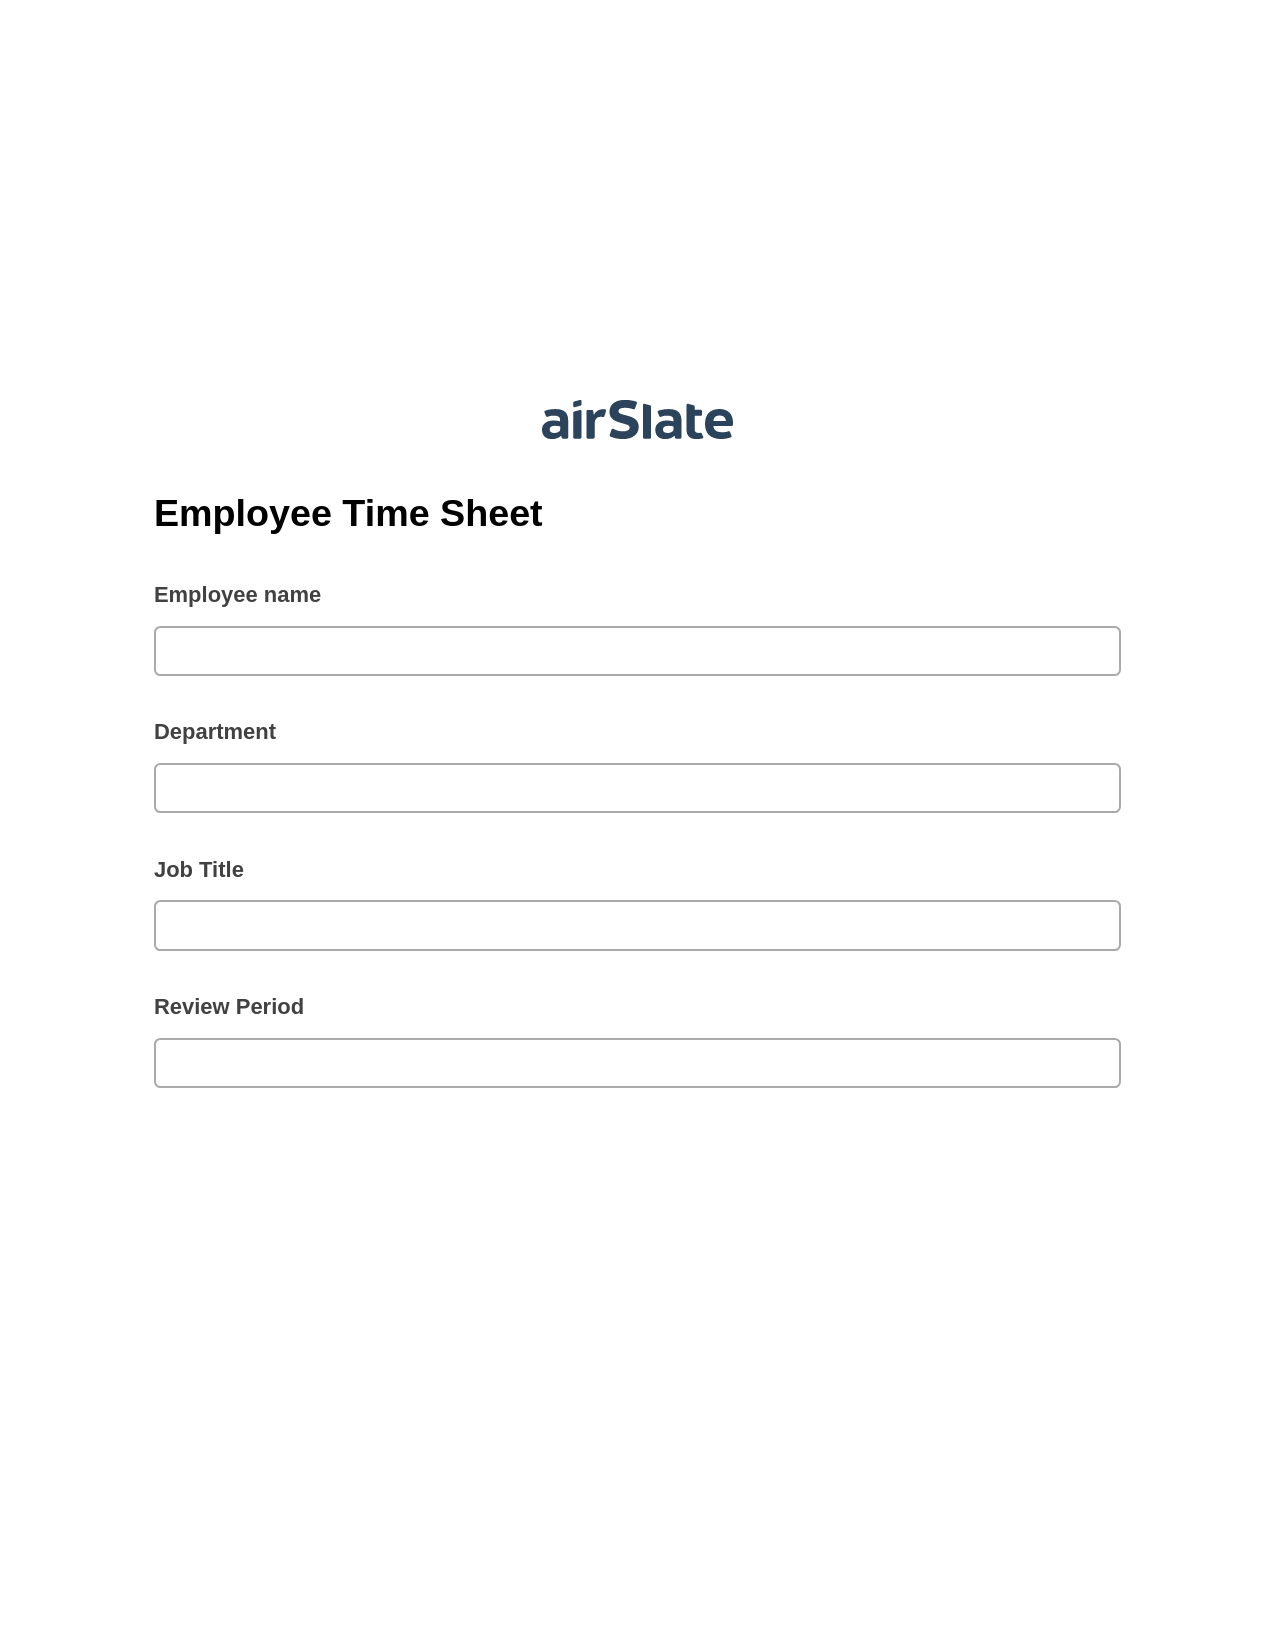 Multirole Employee Time Sheet Pre-fill Dropdowns from CSV file Bot, Create Salesforce Records Bot, Export to Google Sheet Bot